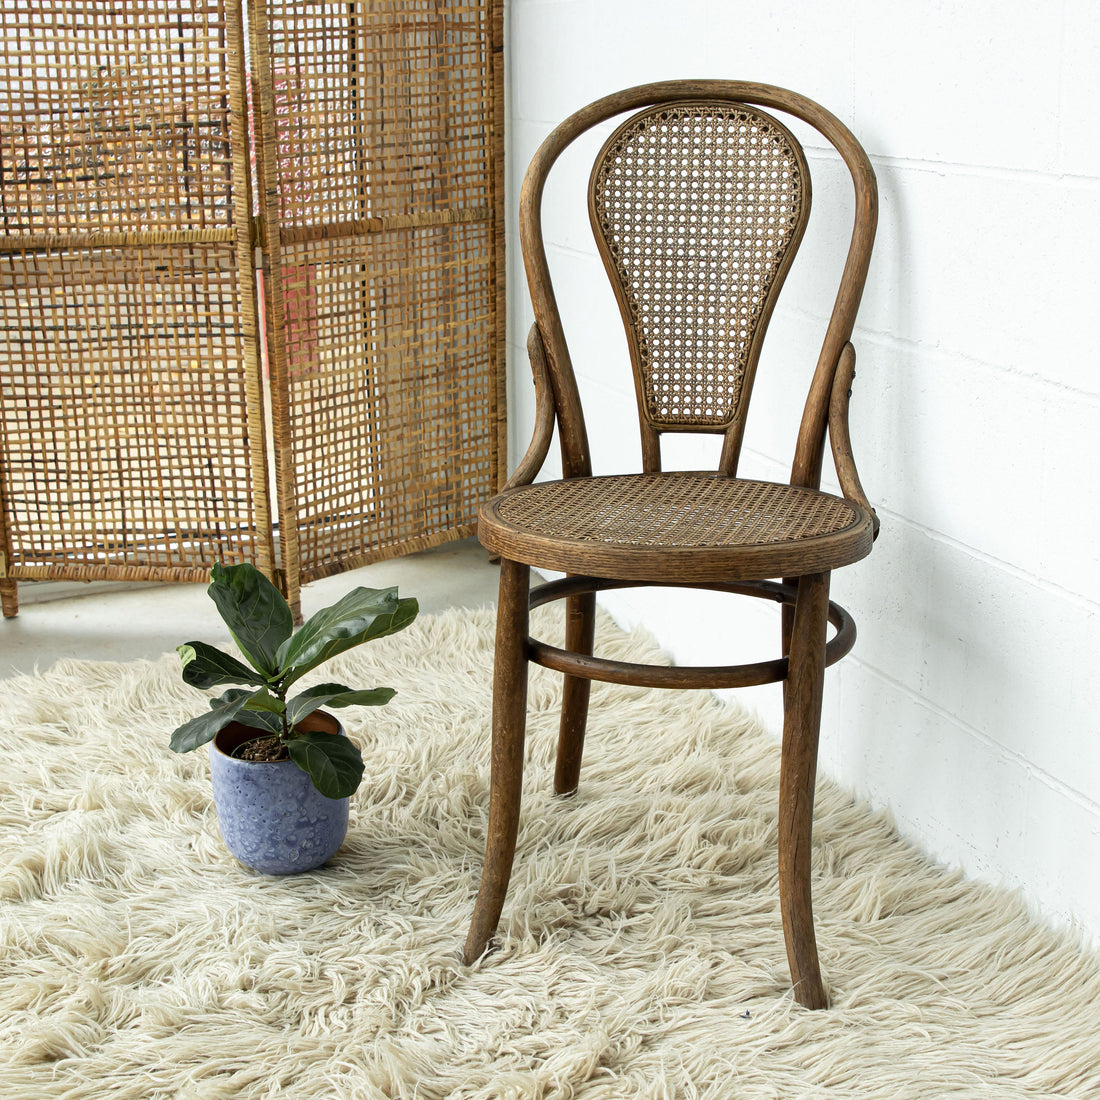 Bentwood Chair with Cane Seat and Back